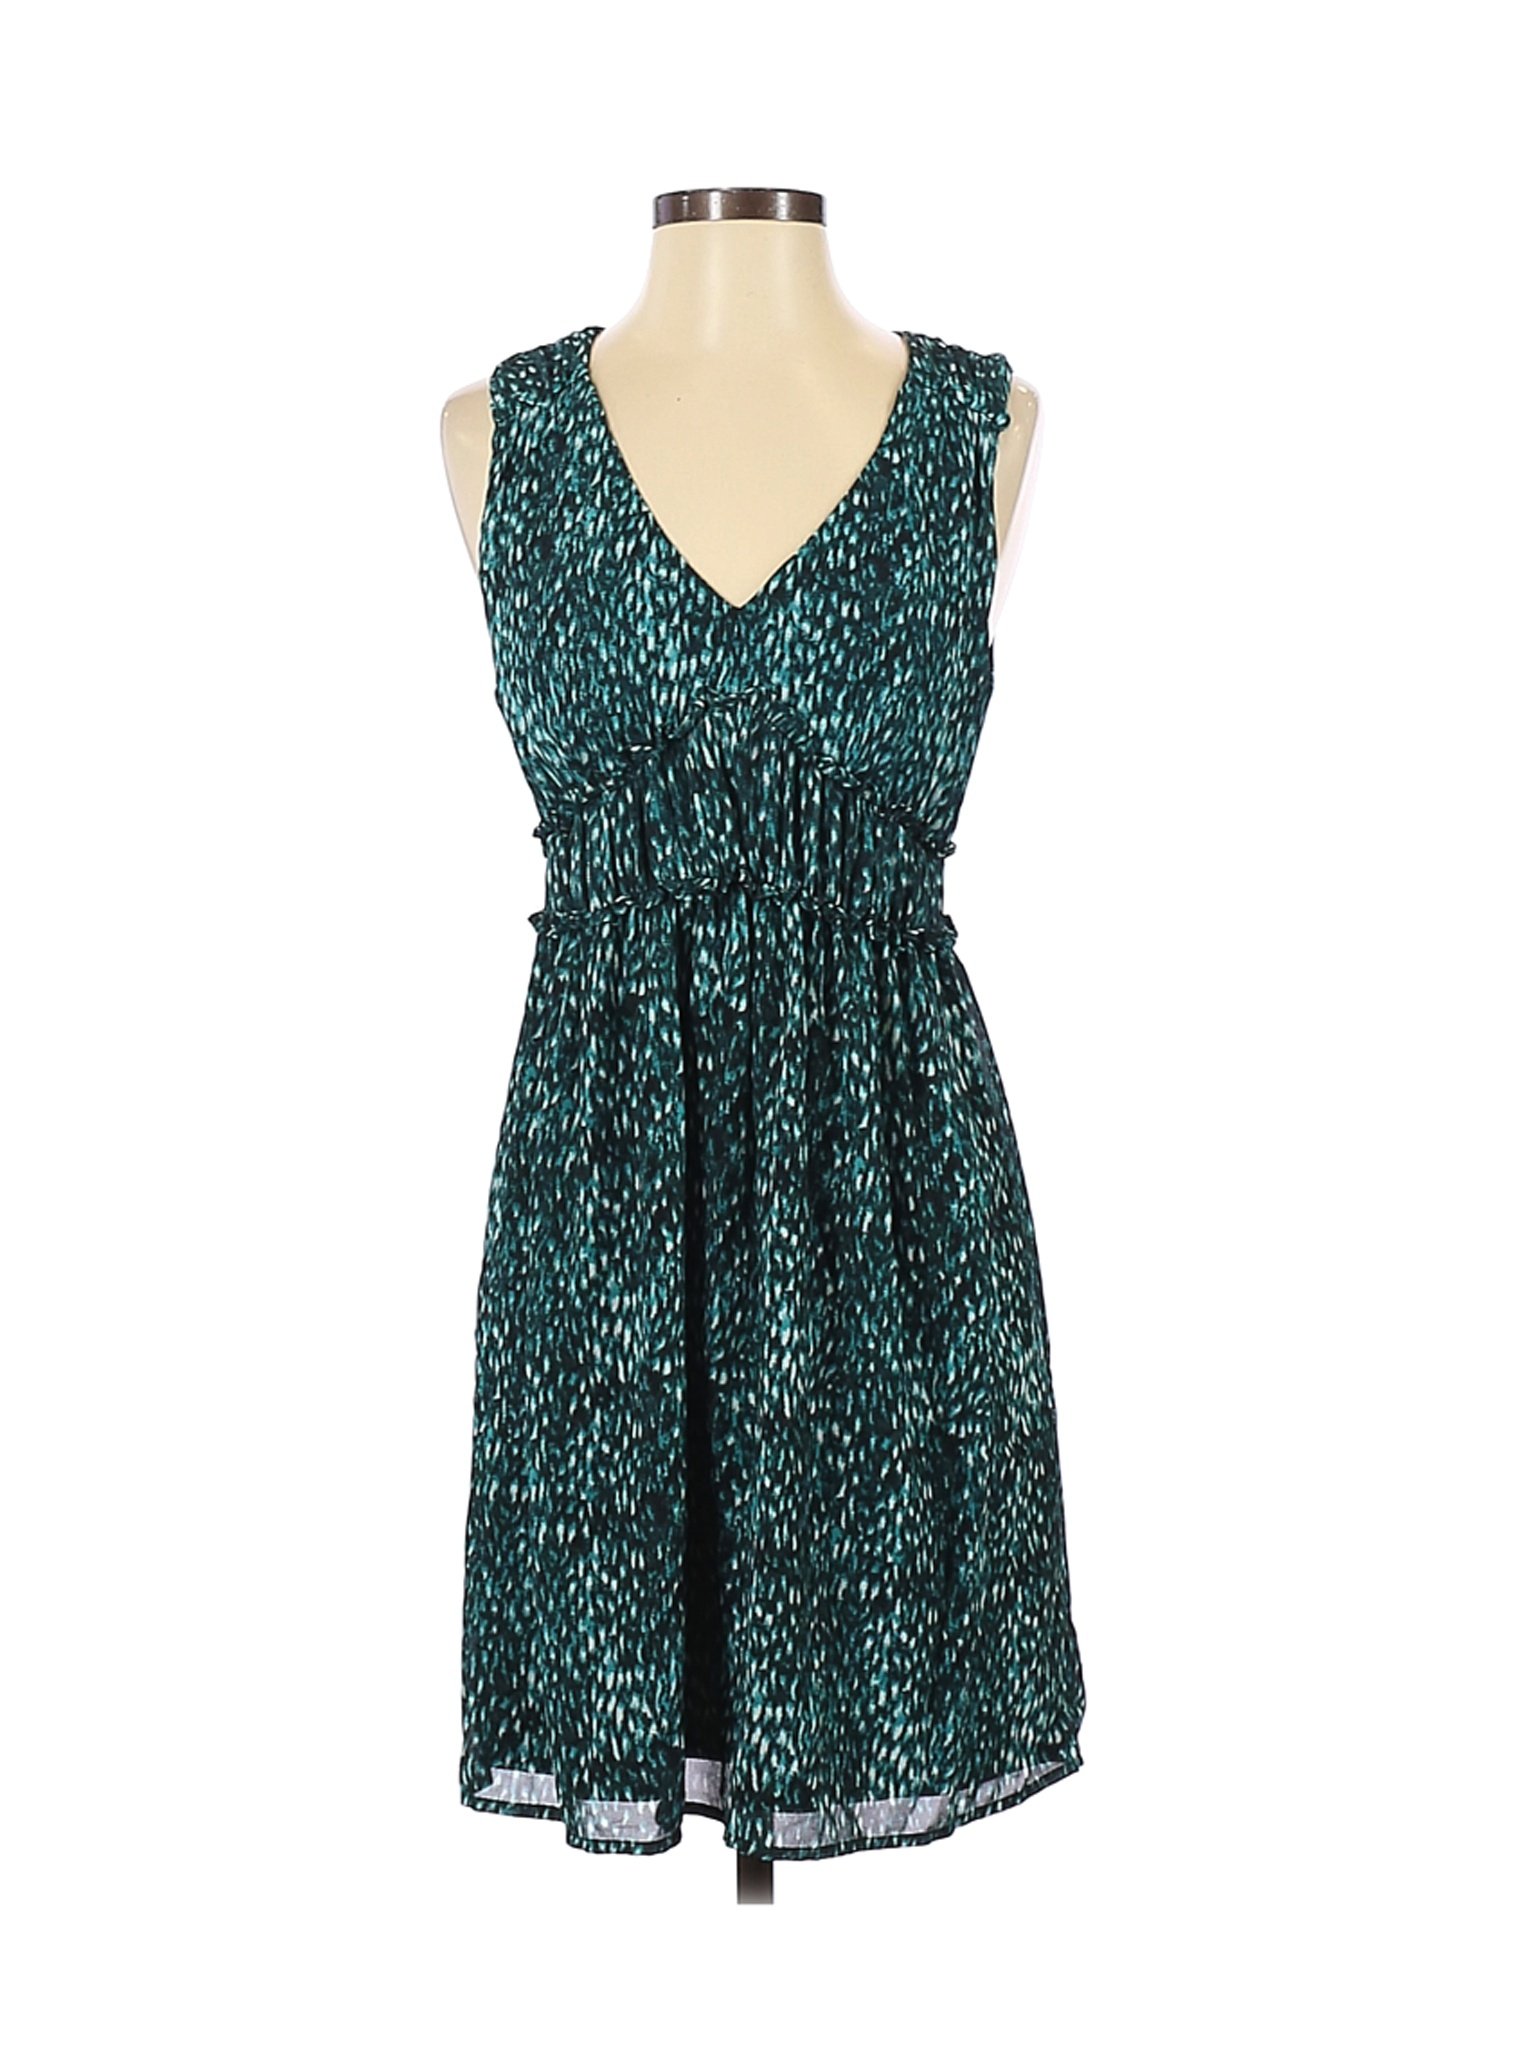 Forever 21 Contemporary Women Green Casual Dress XS | eBay